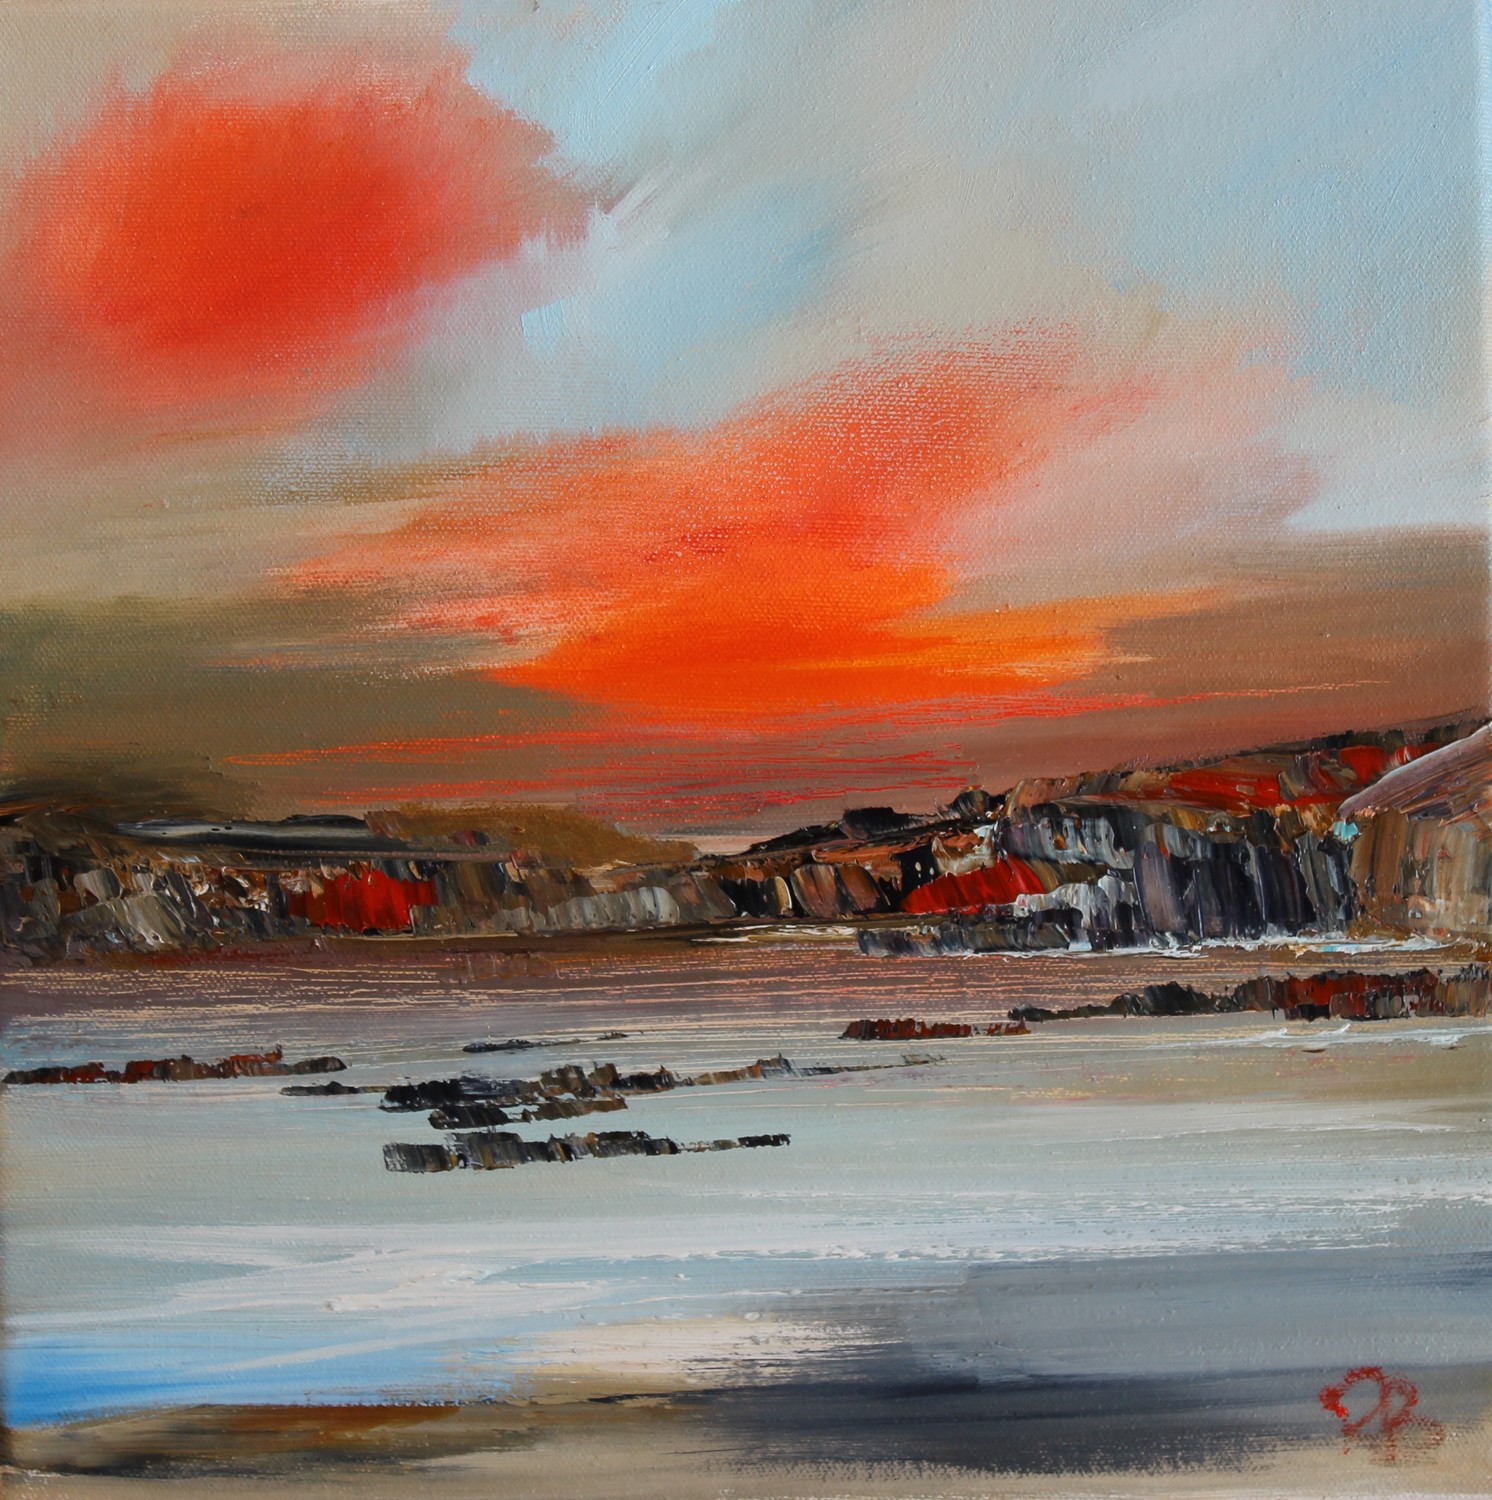 'Skerries at Sunset' by artist Rosanne Barr